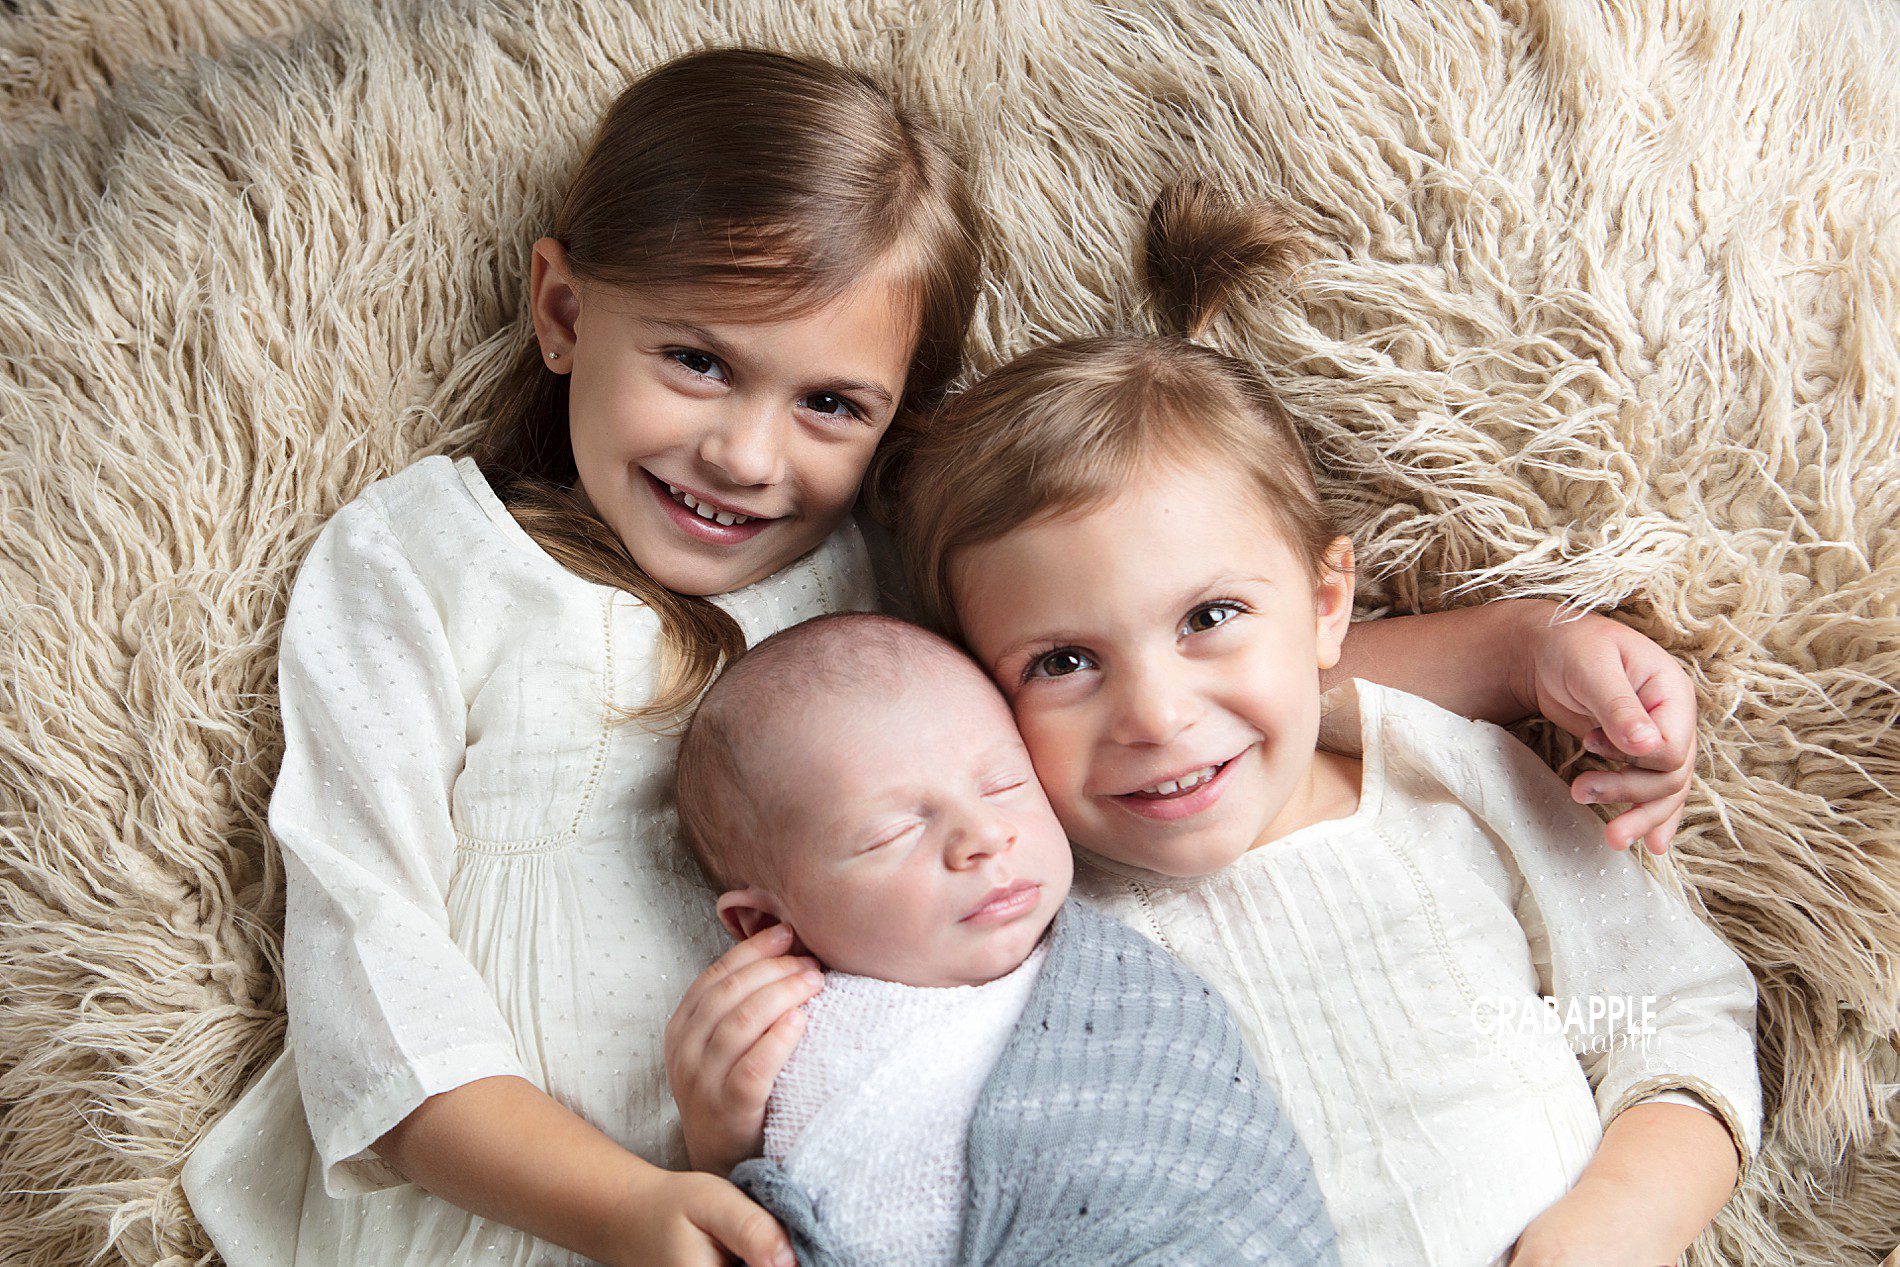 Special Mom with kids family pictures - kristendyer.com